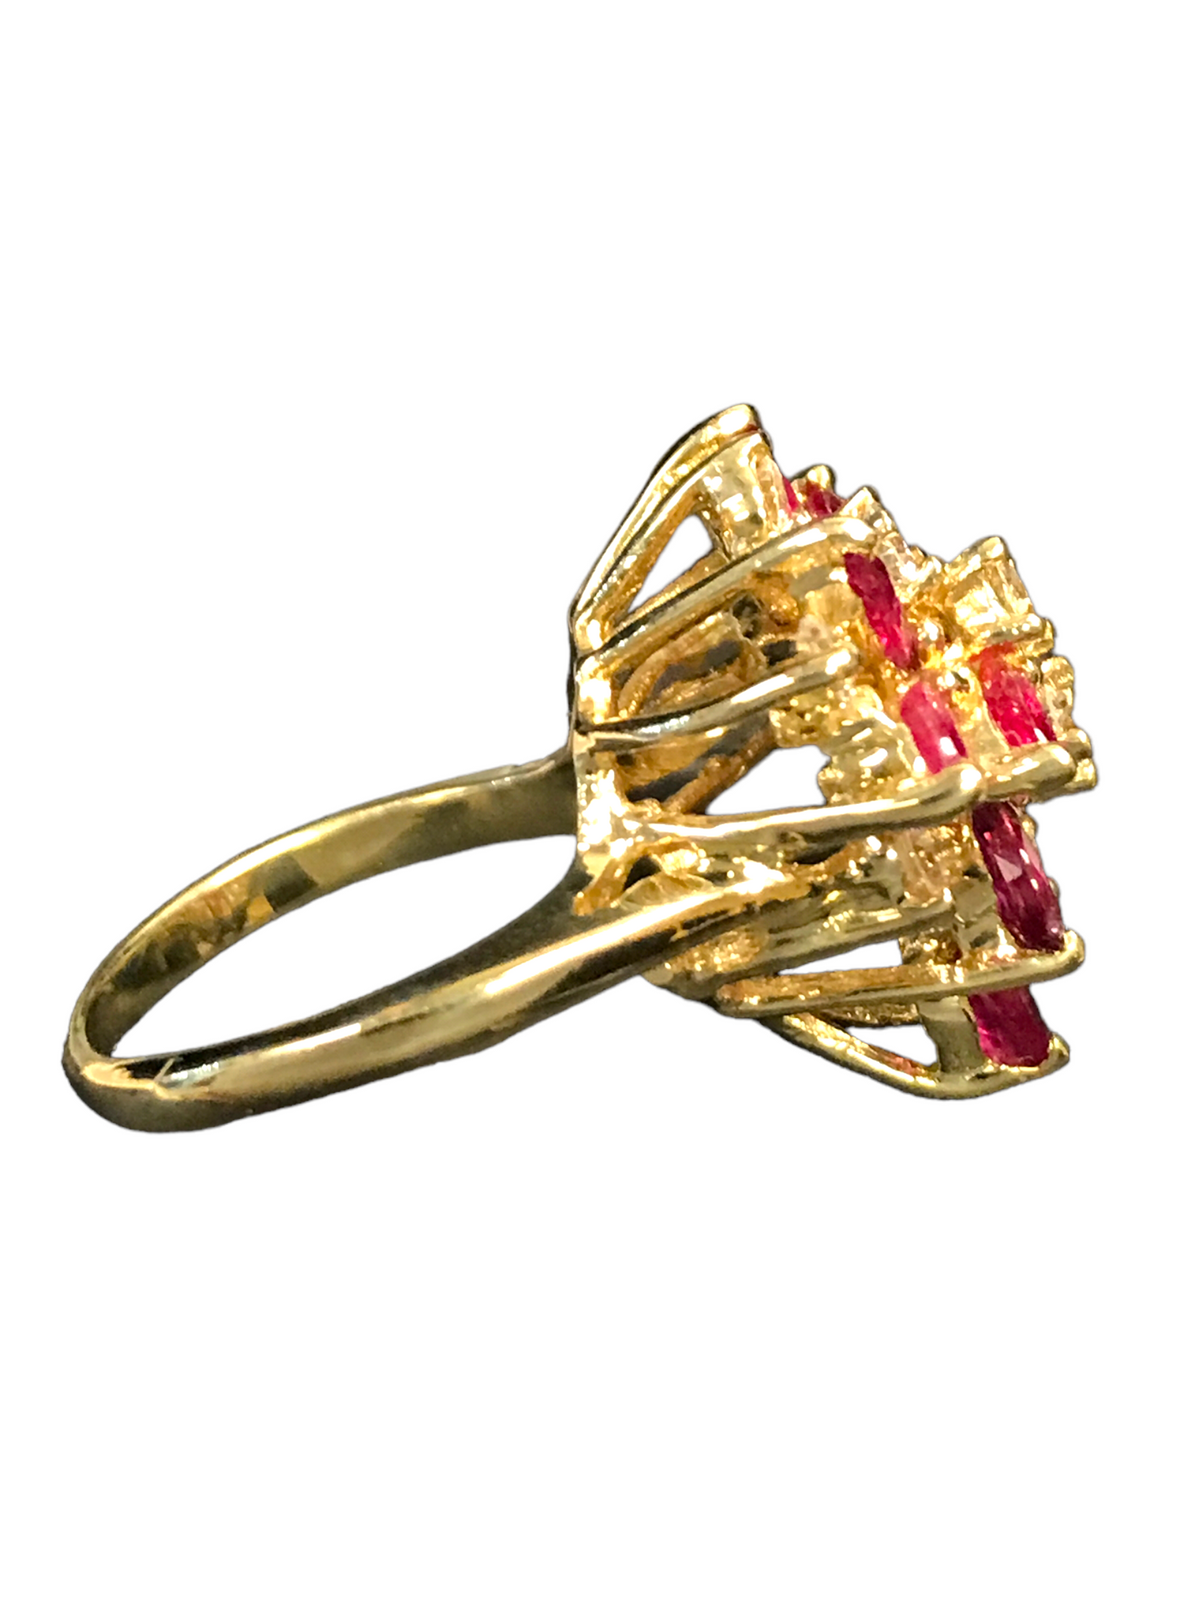 14k Yellow Gold Ruby and Diamond Ladies Cocktail Ring Size 4.5